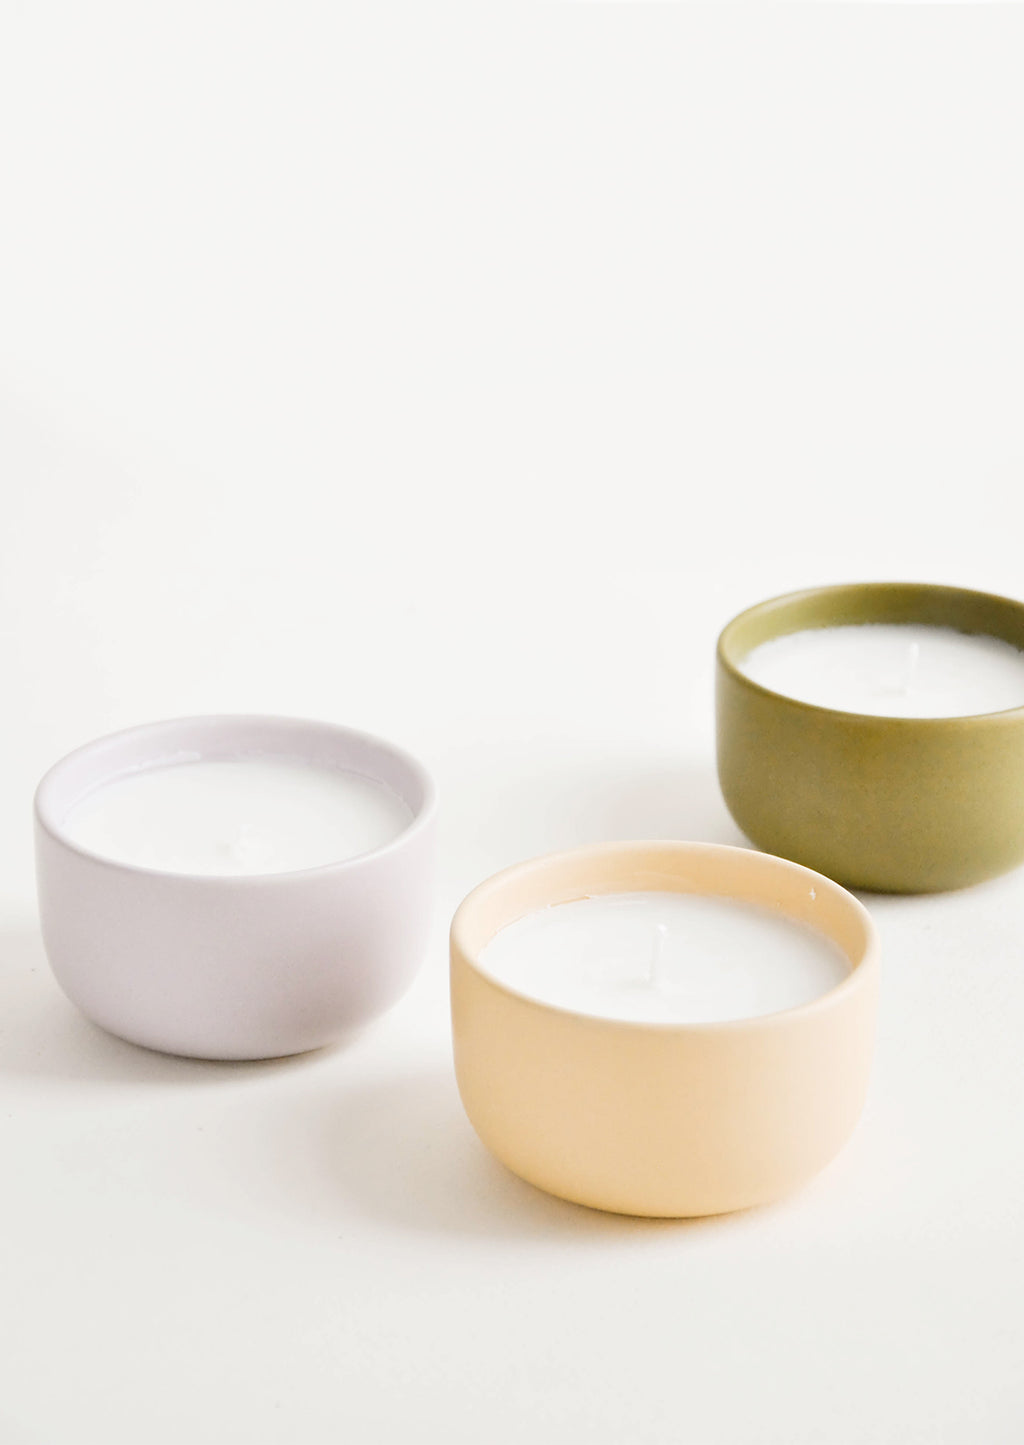 1: Small scented candles in colorful ceramic vessels